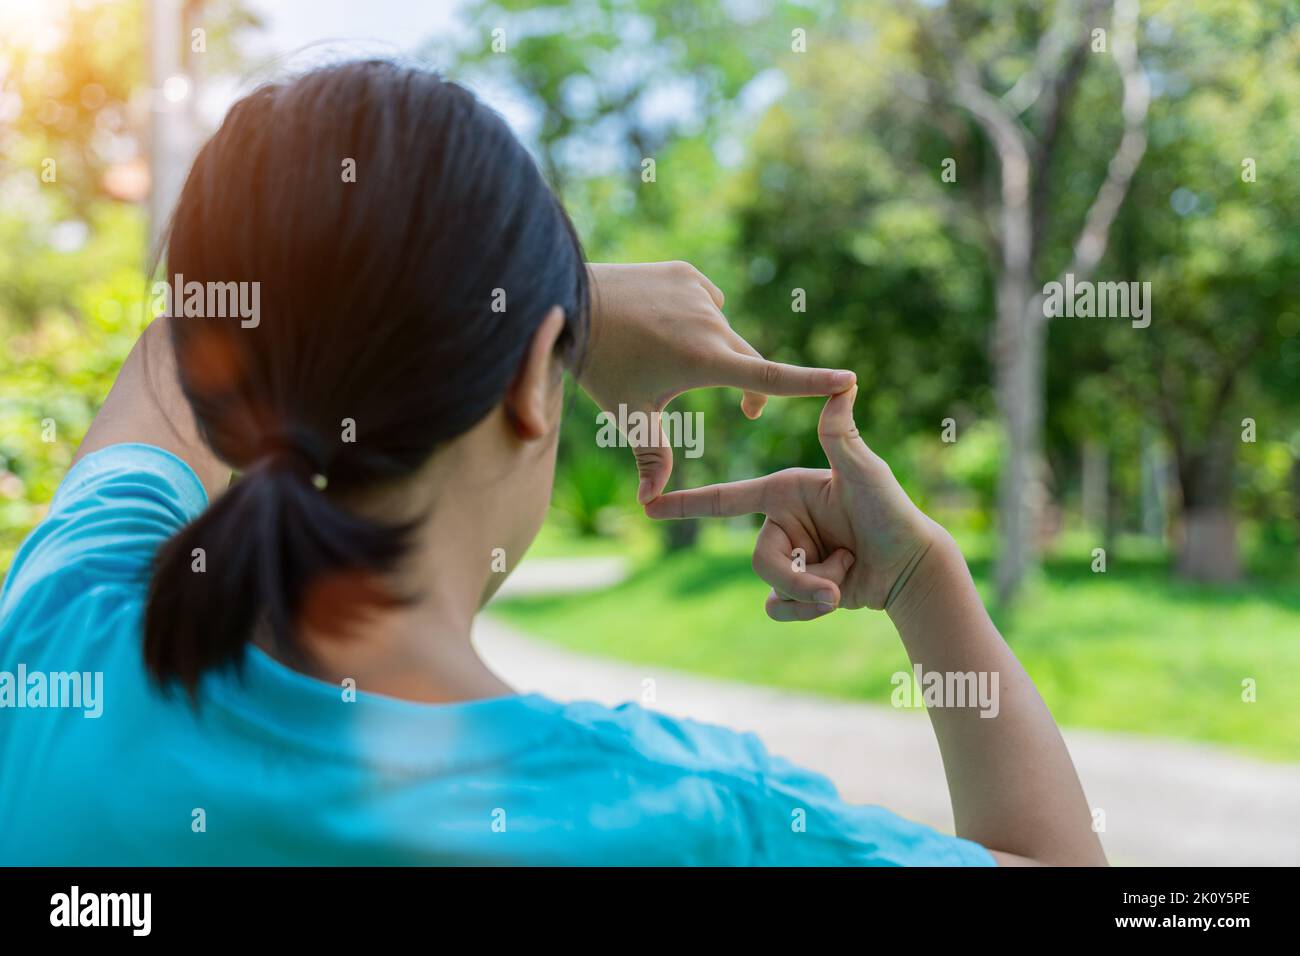 Close up of child girl smiling making frame with hands and fingers. Creativity and photography concept. Stock Photo